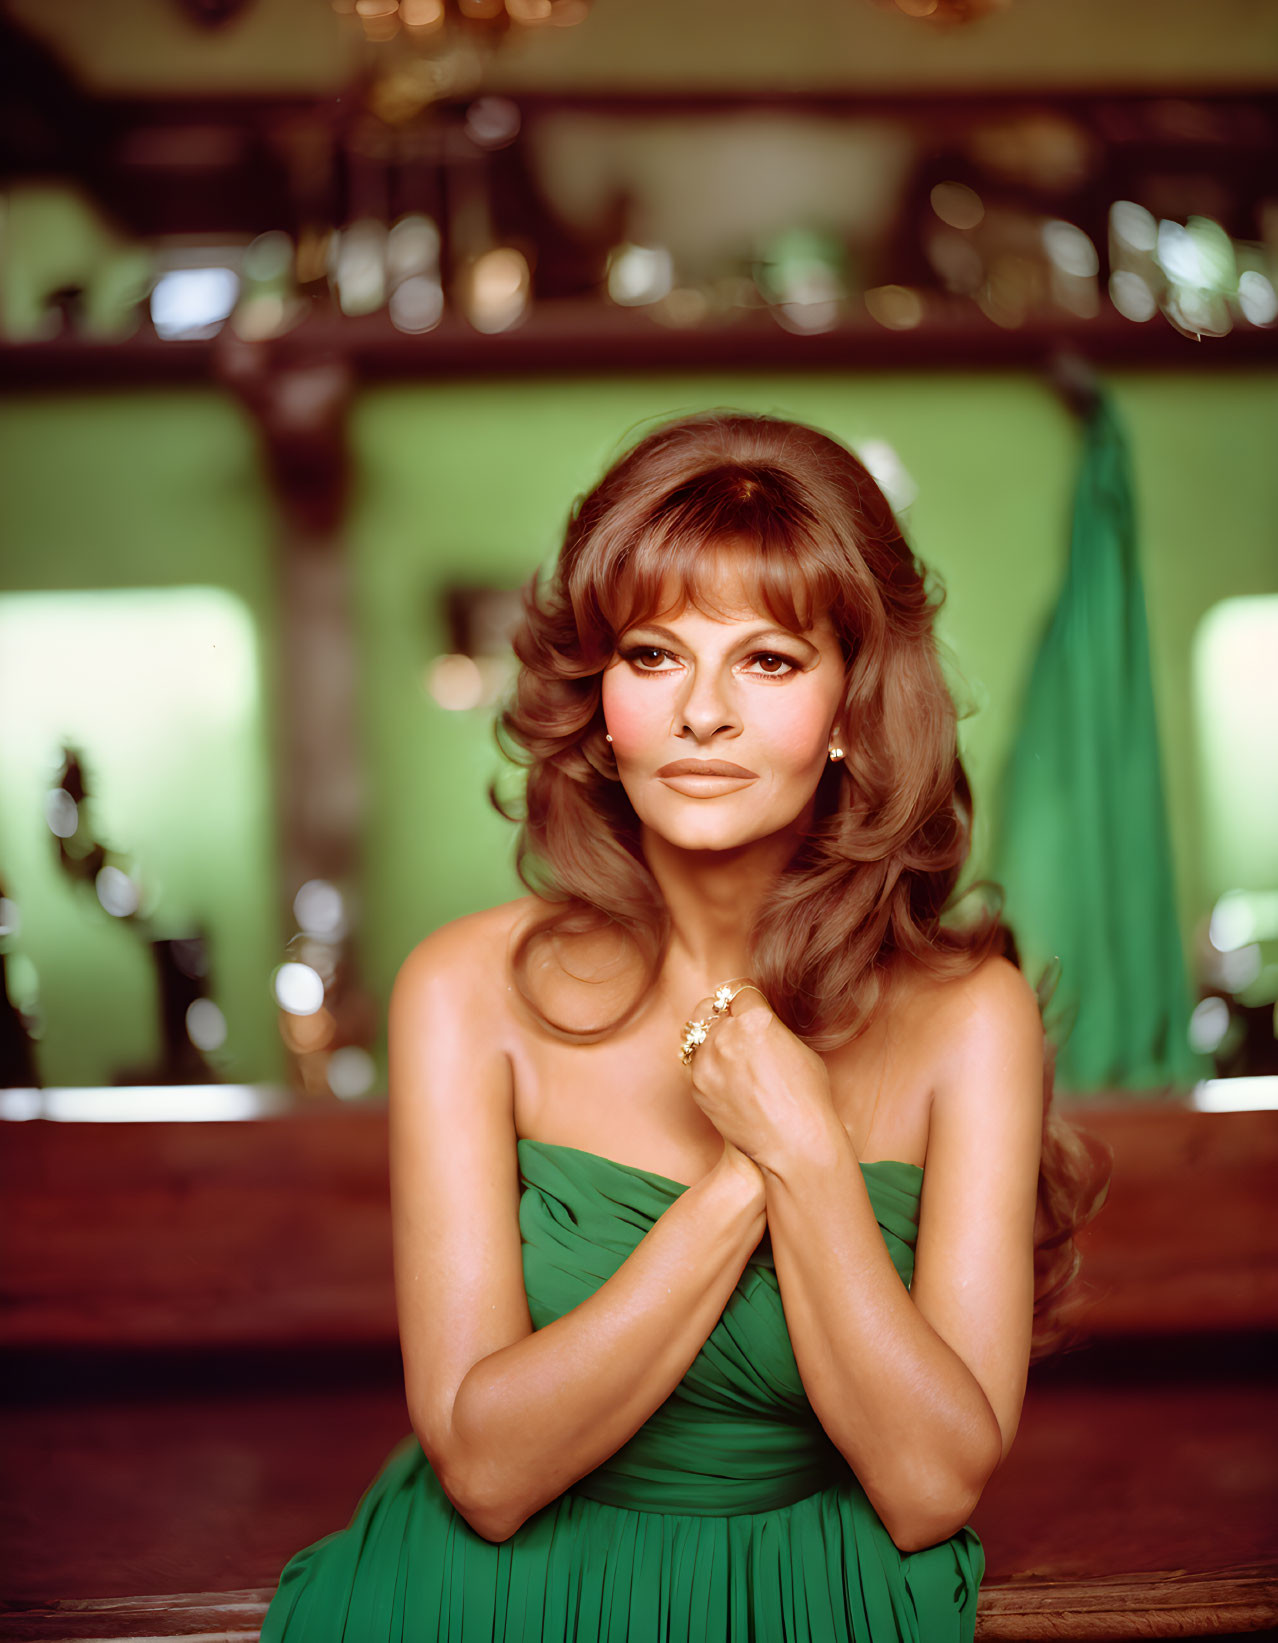 Woman with voluminous hair in green strapless dress at bar, hands clasped, wearing gold ring